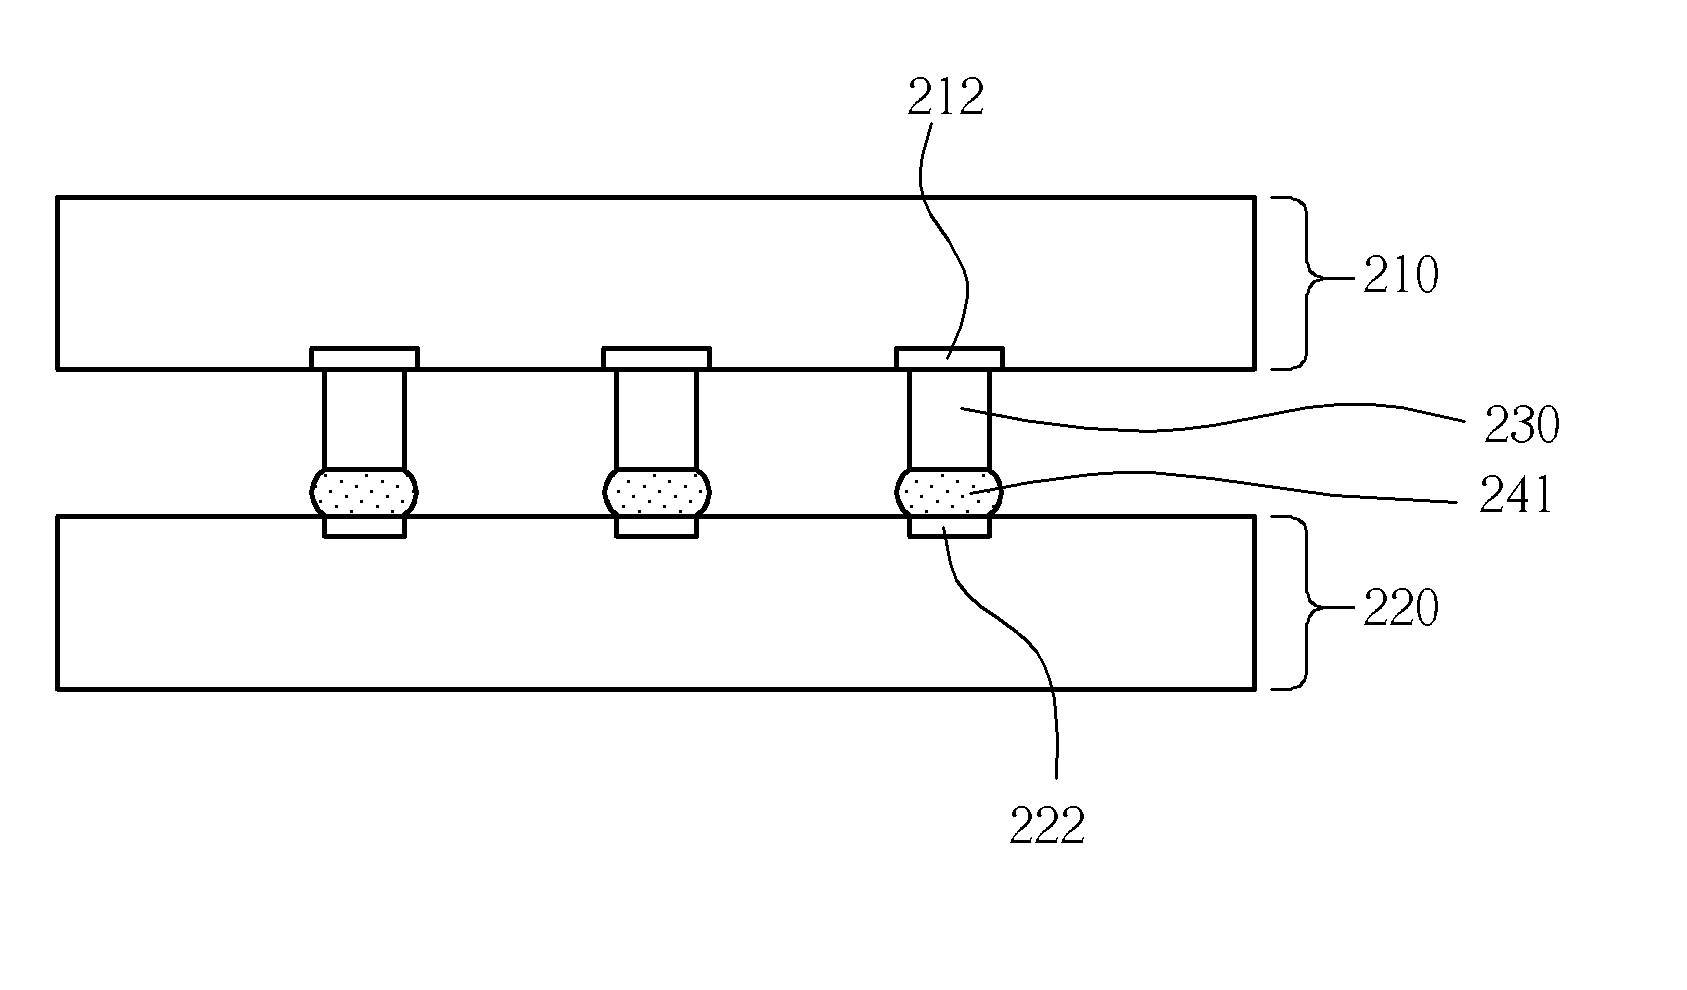 Multi-chip structure and method of assembling chips